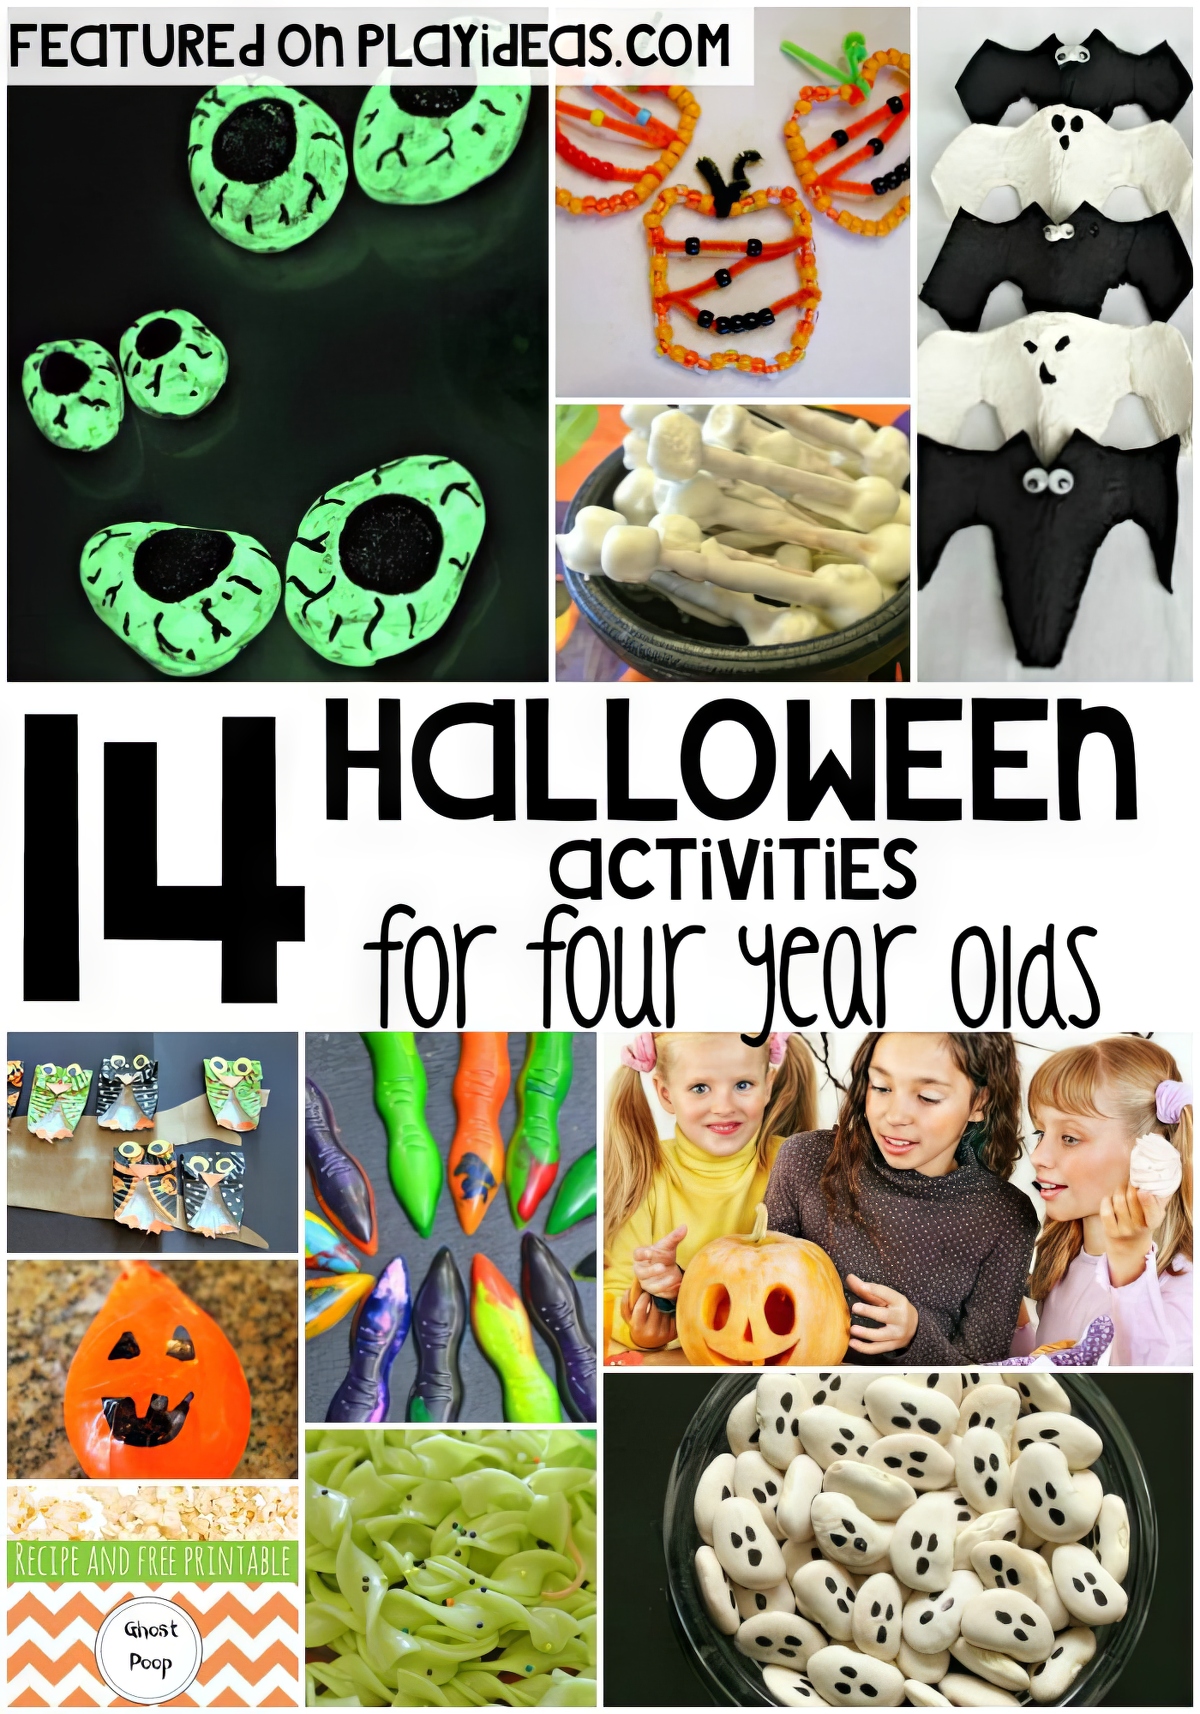 Halloween Ideas For 4 Year Olds